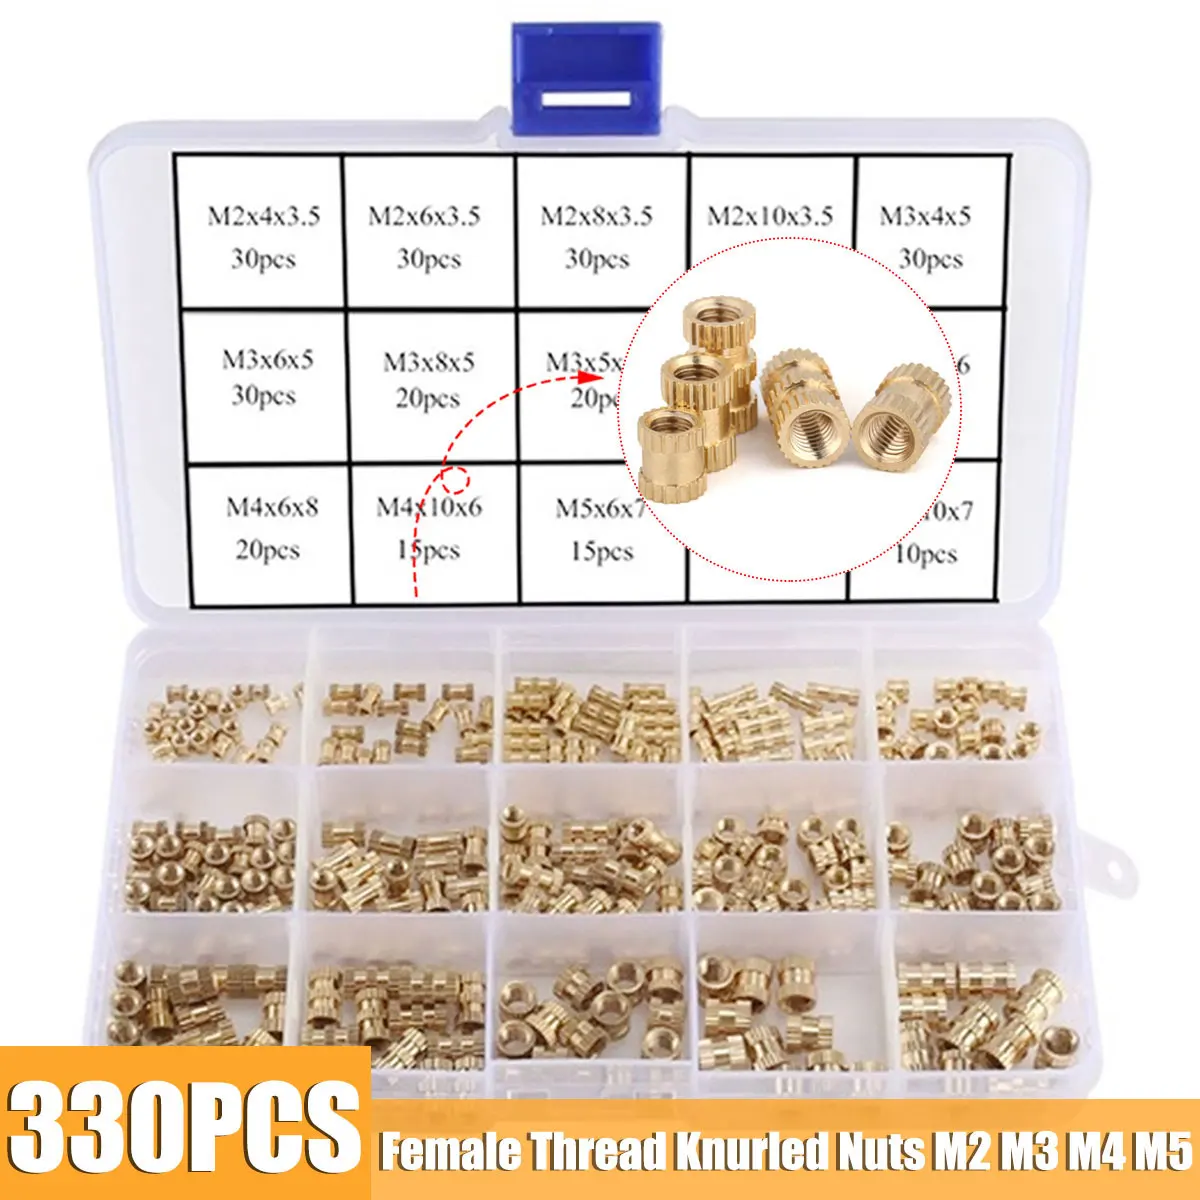 

330Pcs/set M2 M3 M4 M5 Female Thread Knurled Nuts Brass Threaded Insert Round Injection Moulding Knurled Nuts Assortment Kit